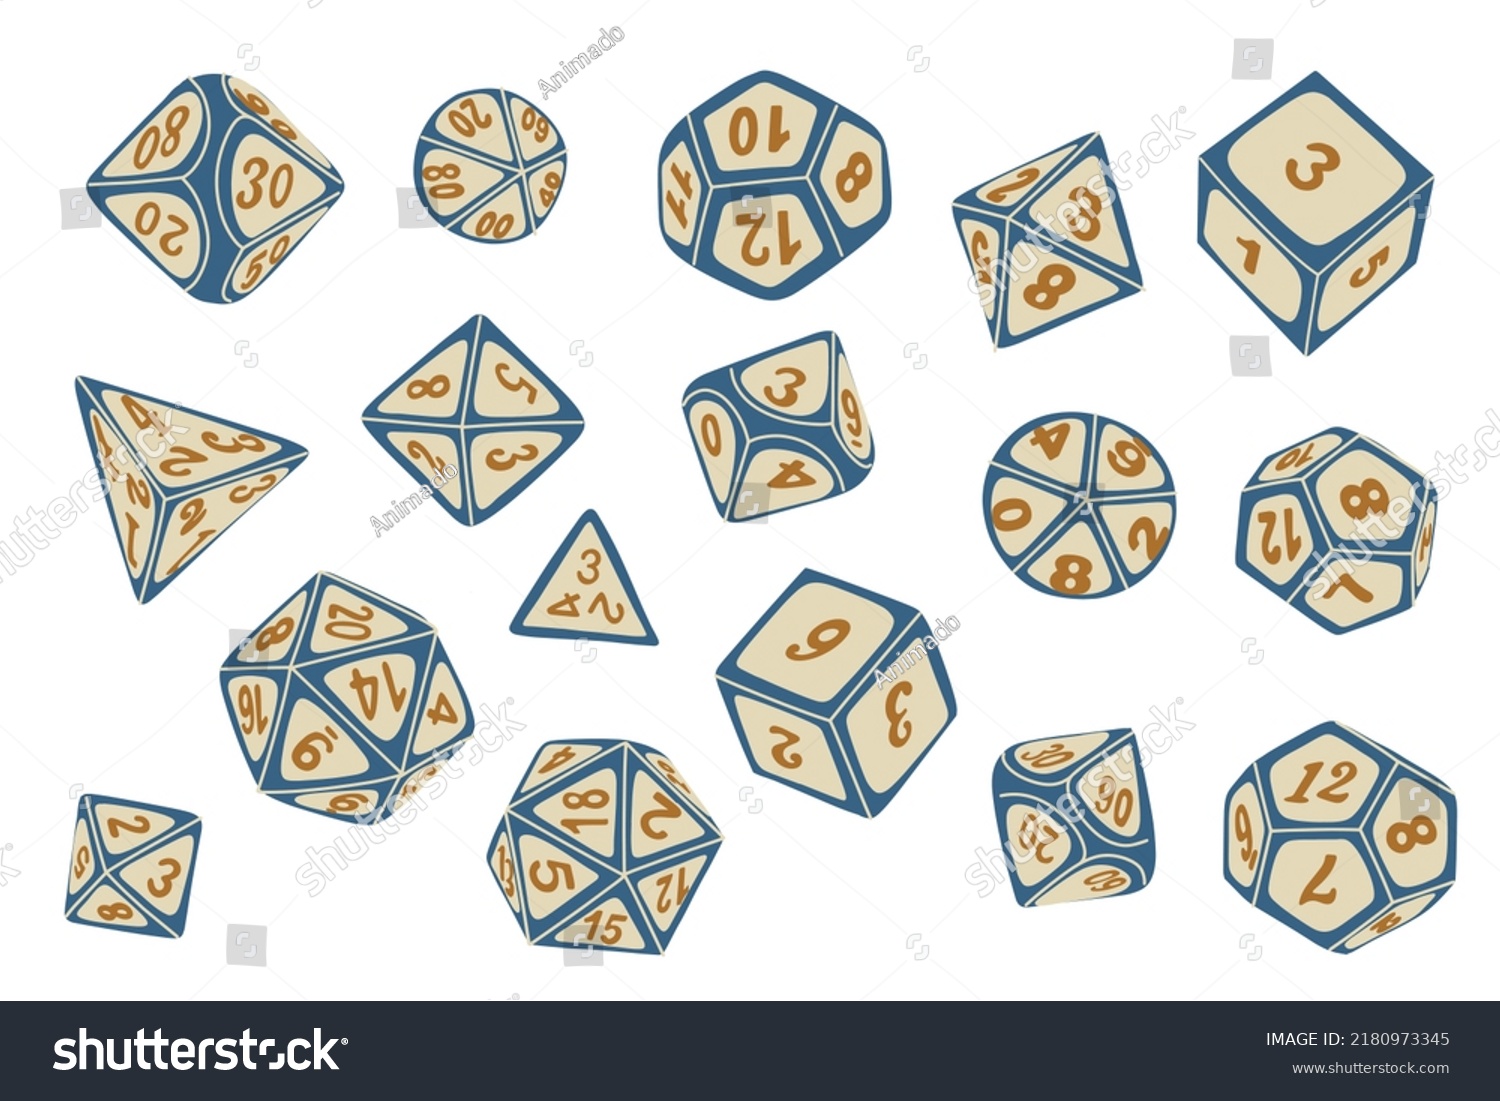 SVG of Vector icon set of dice for boardgames such as DND and RPG in doodle style retro color svg